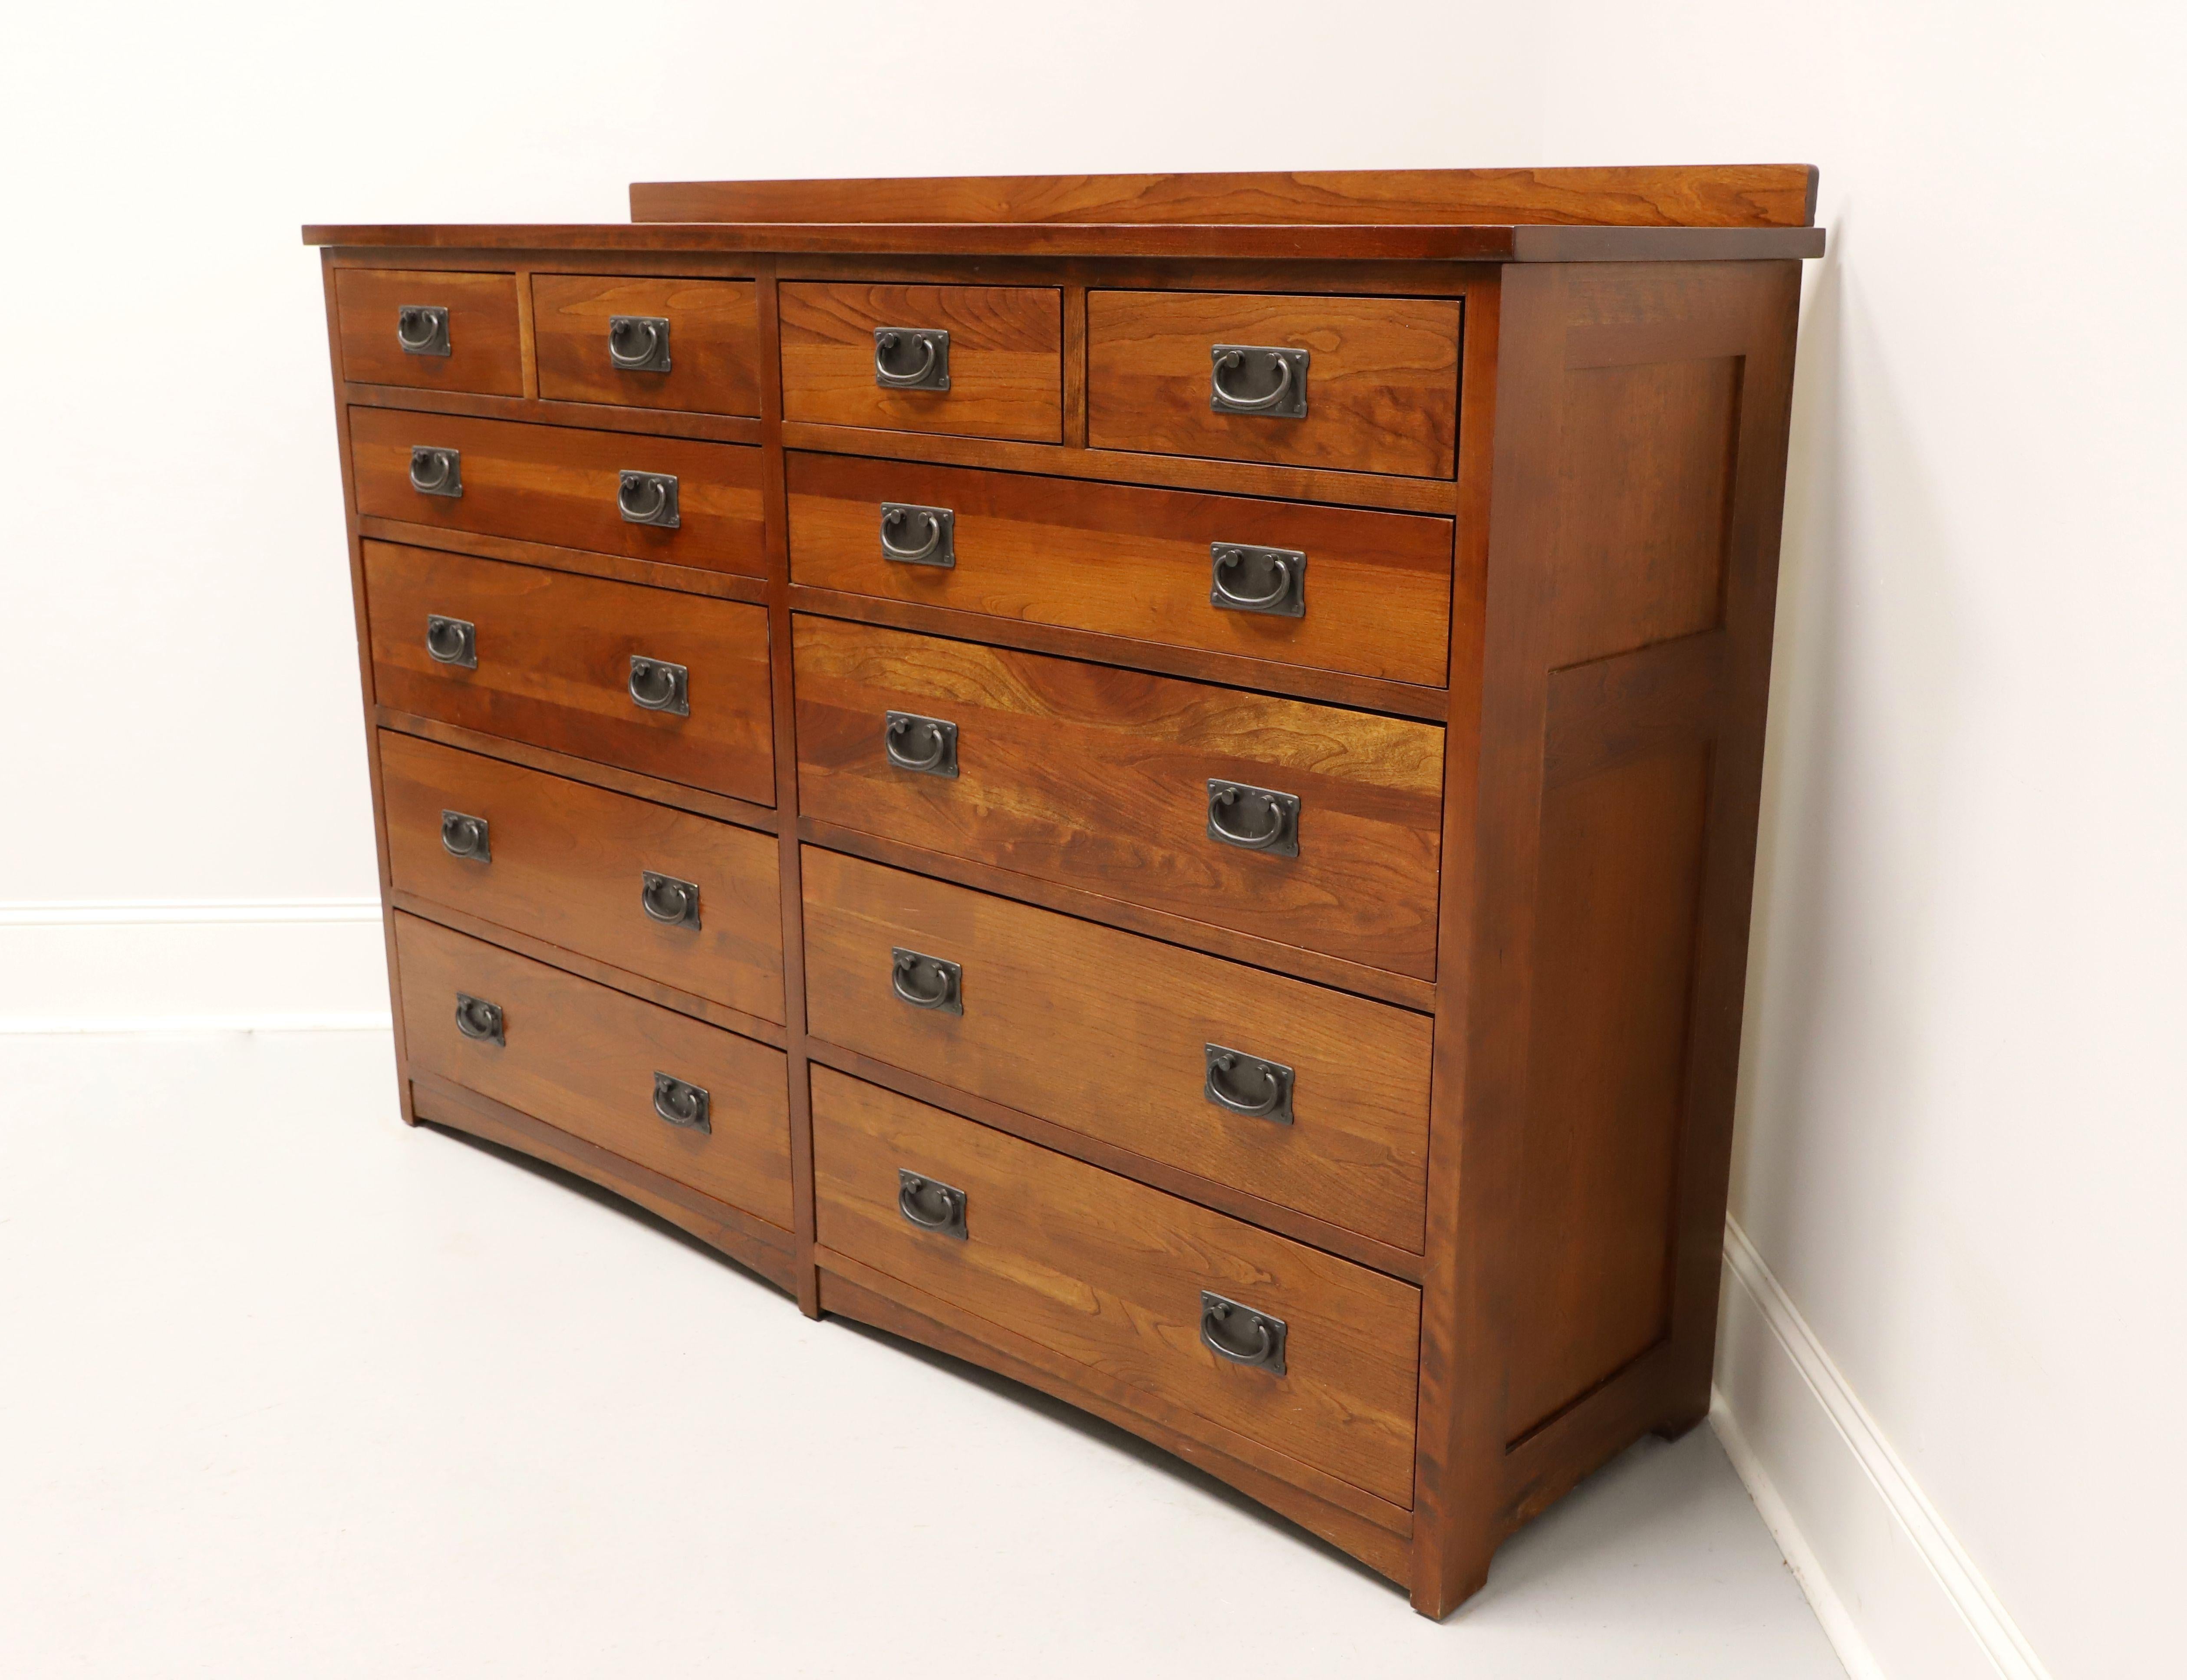 Mission MICHEAL'S MISSION by MILLER Cherry Arts & Crafts Mule Chest with Cedar Drawers